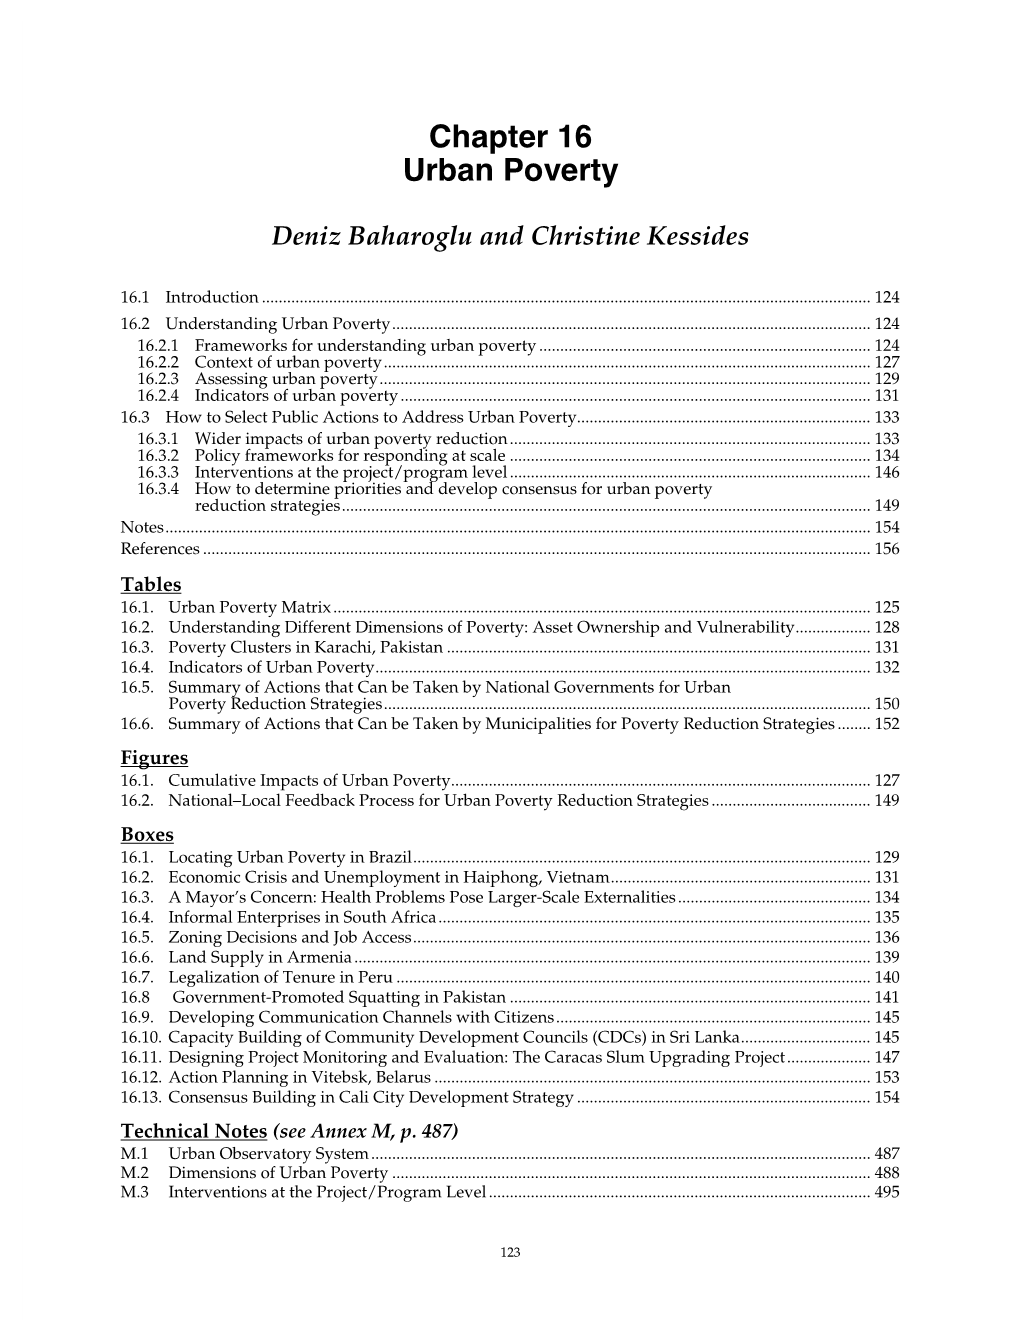 Chapter 16 Urban Poverty